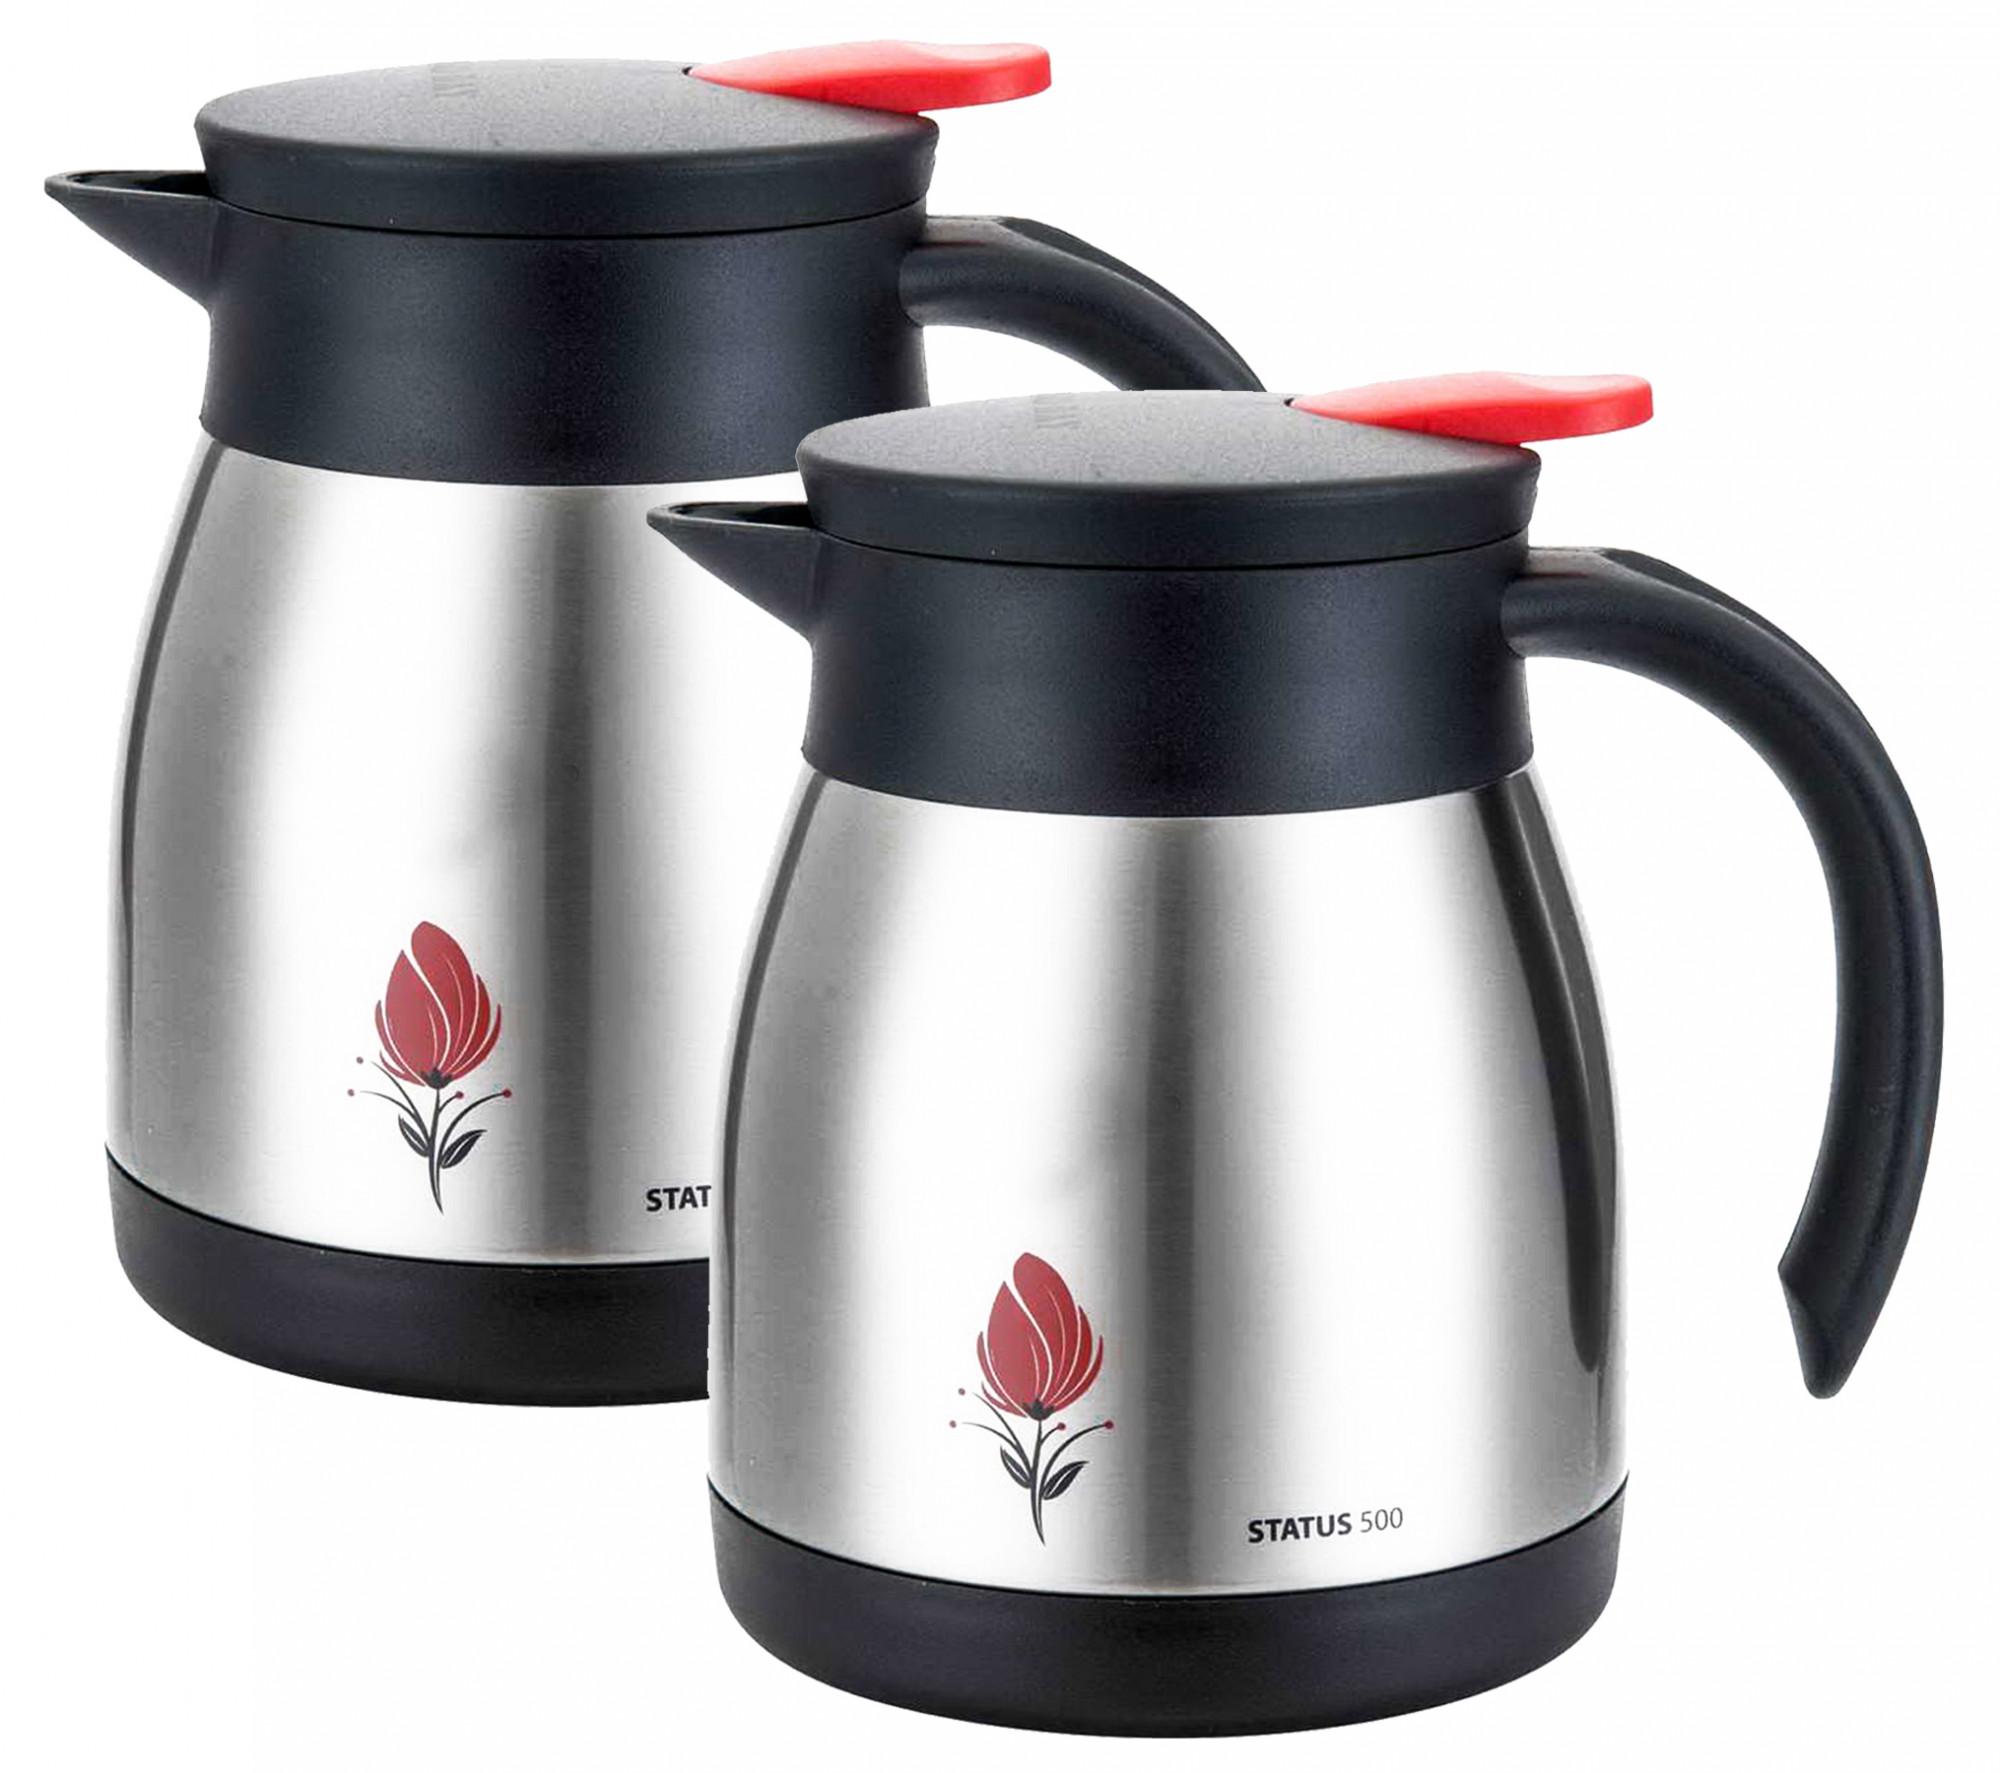 Kuber Industries Stainless Thermo Steel Double-Wall Vacuum Insulated Coffee,Tea, Beverage Pot/Kettle, 500ml (Black)-HS42KUBMART25105